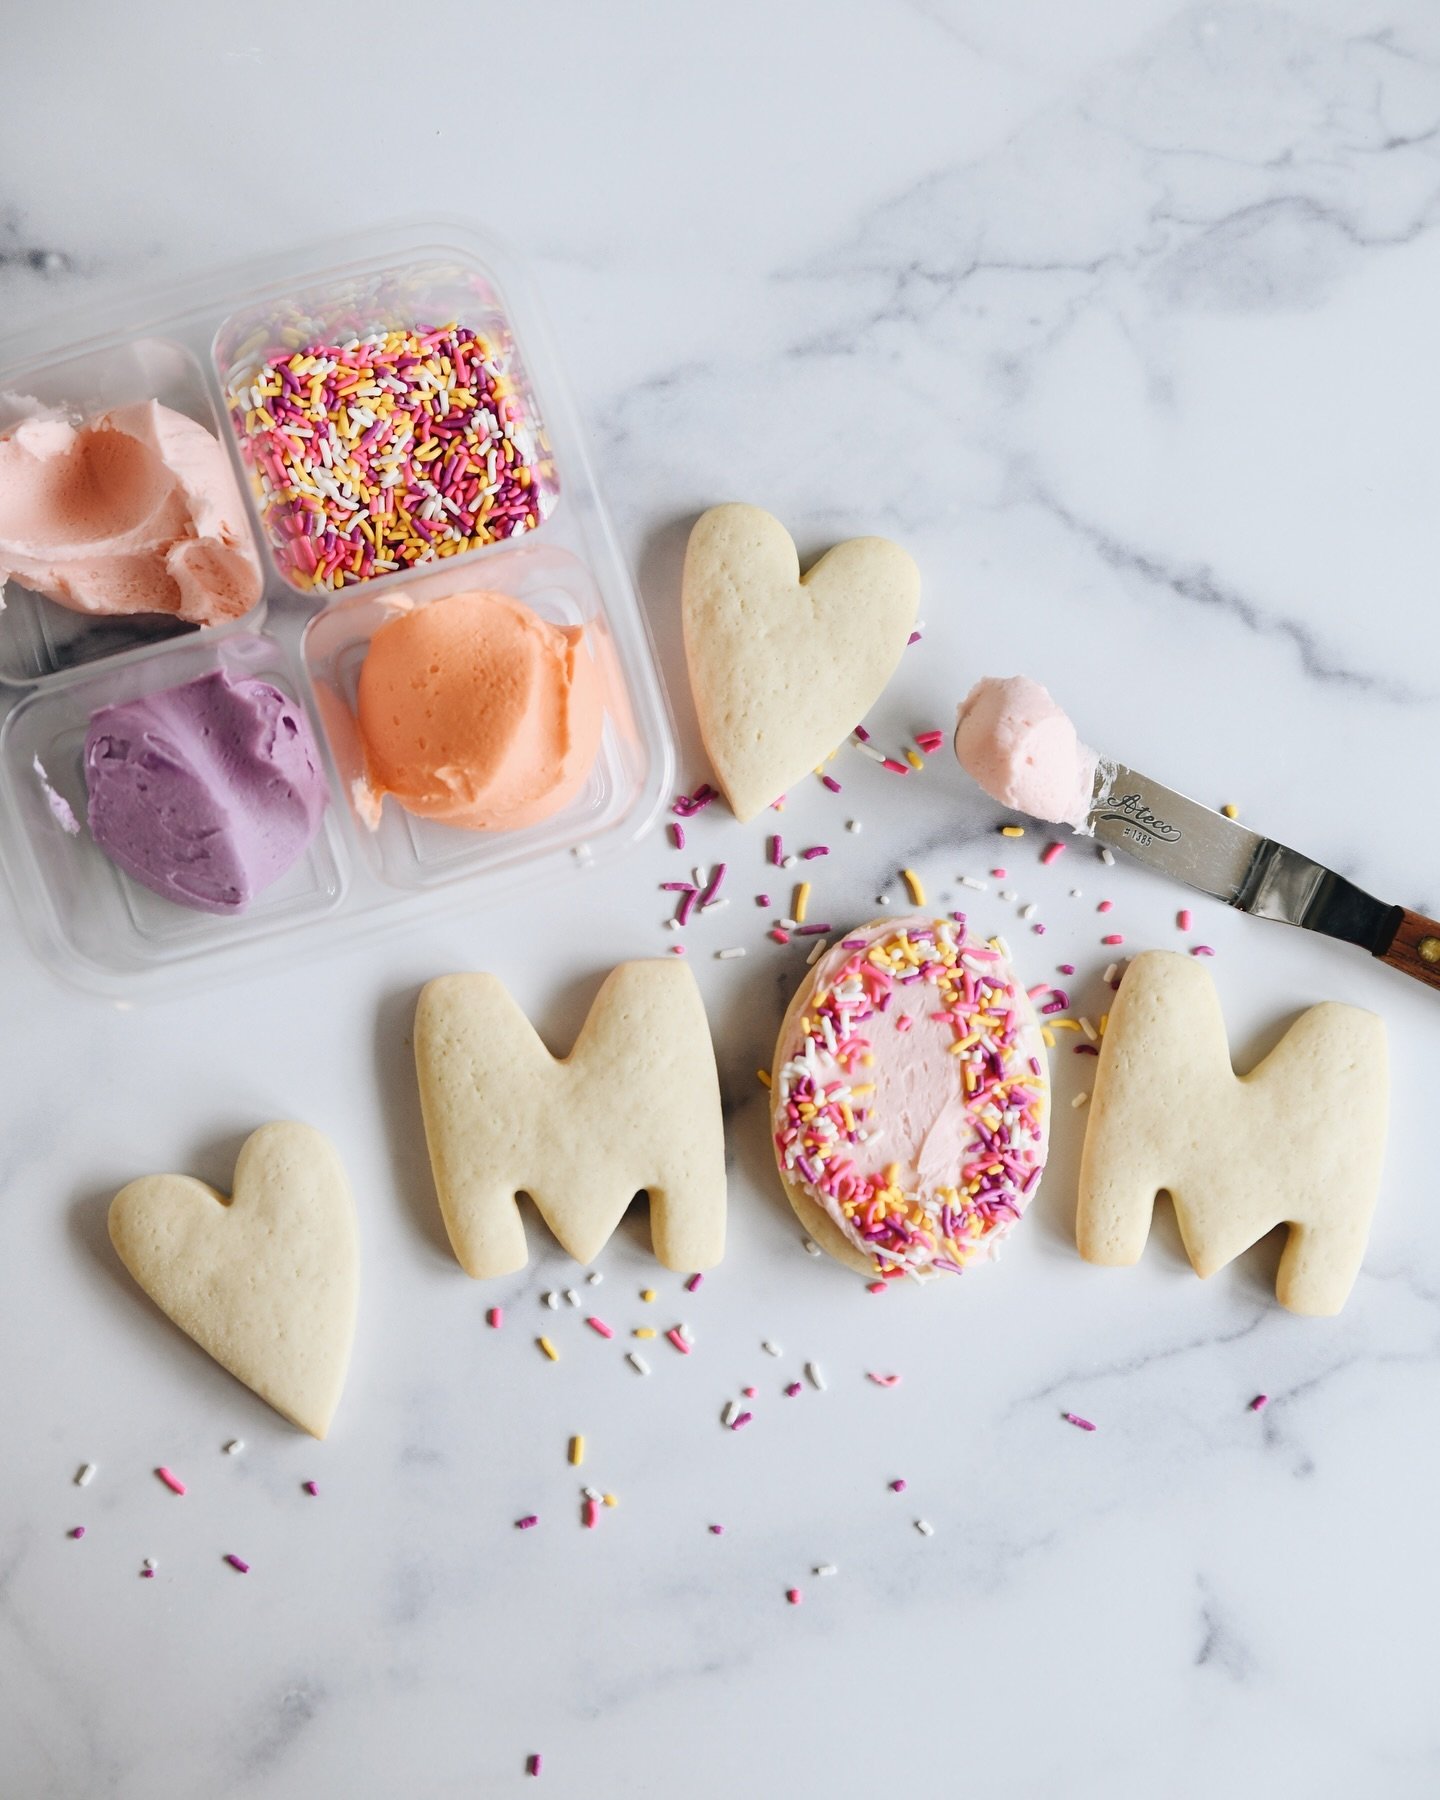 She&rsquo;s the best, so show her with some sweets! 💝Happy Mother&rsquo;s Day to all the moms!